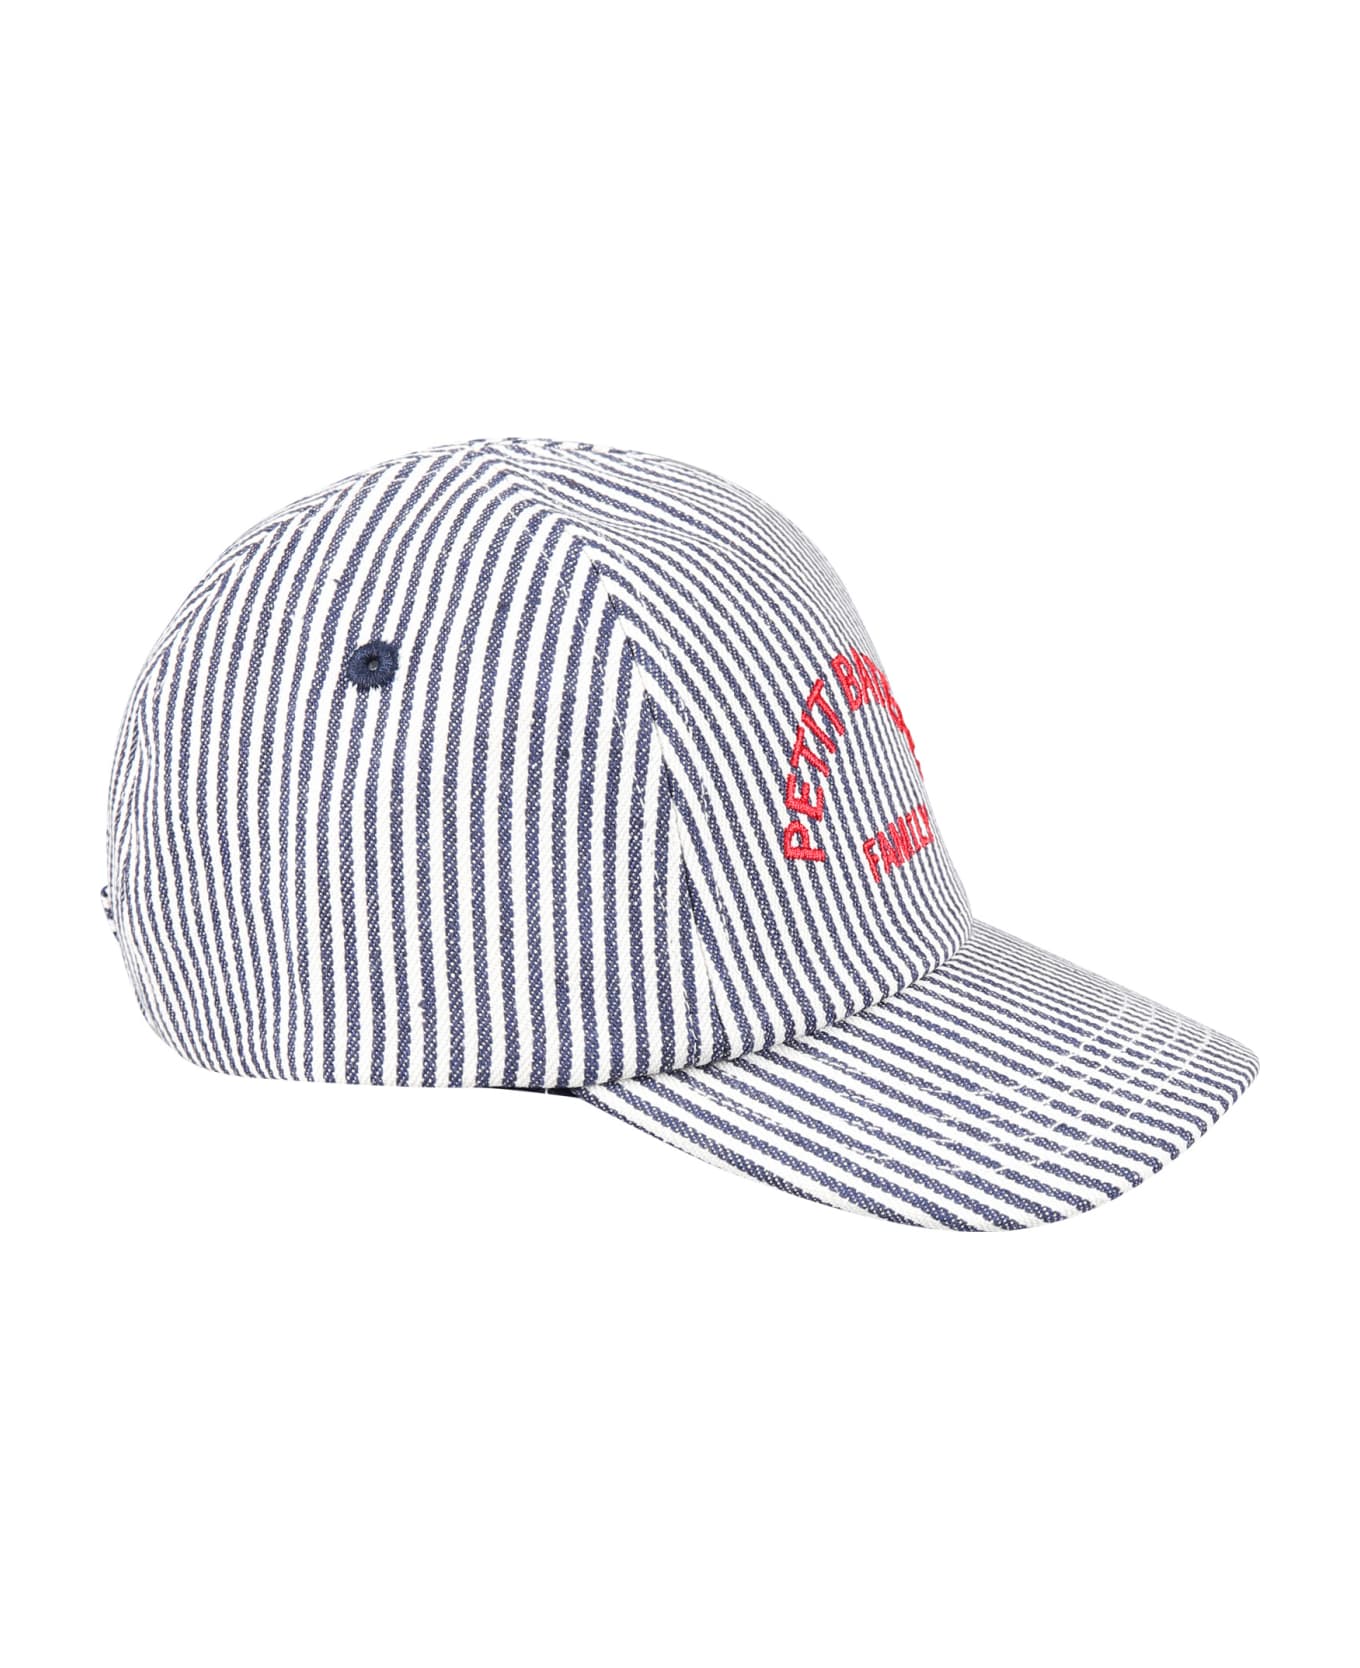 Petit Bateau Multicolor Hat For Baby Boy With "petit Bateau Family " Writing - Multicolor アクセサリー＆ギフト